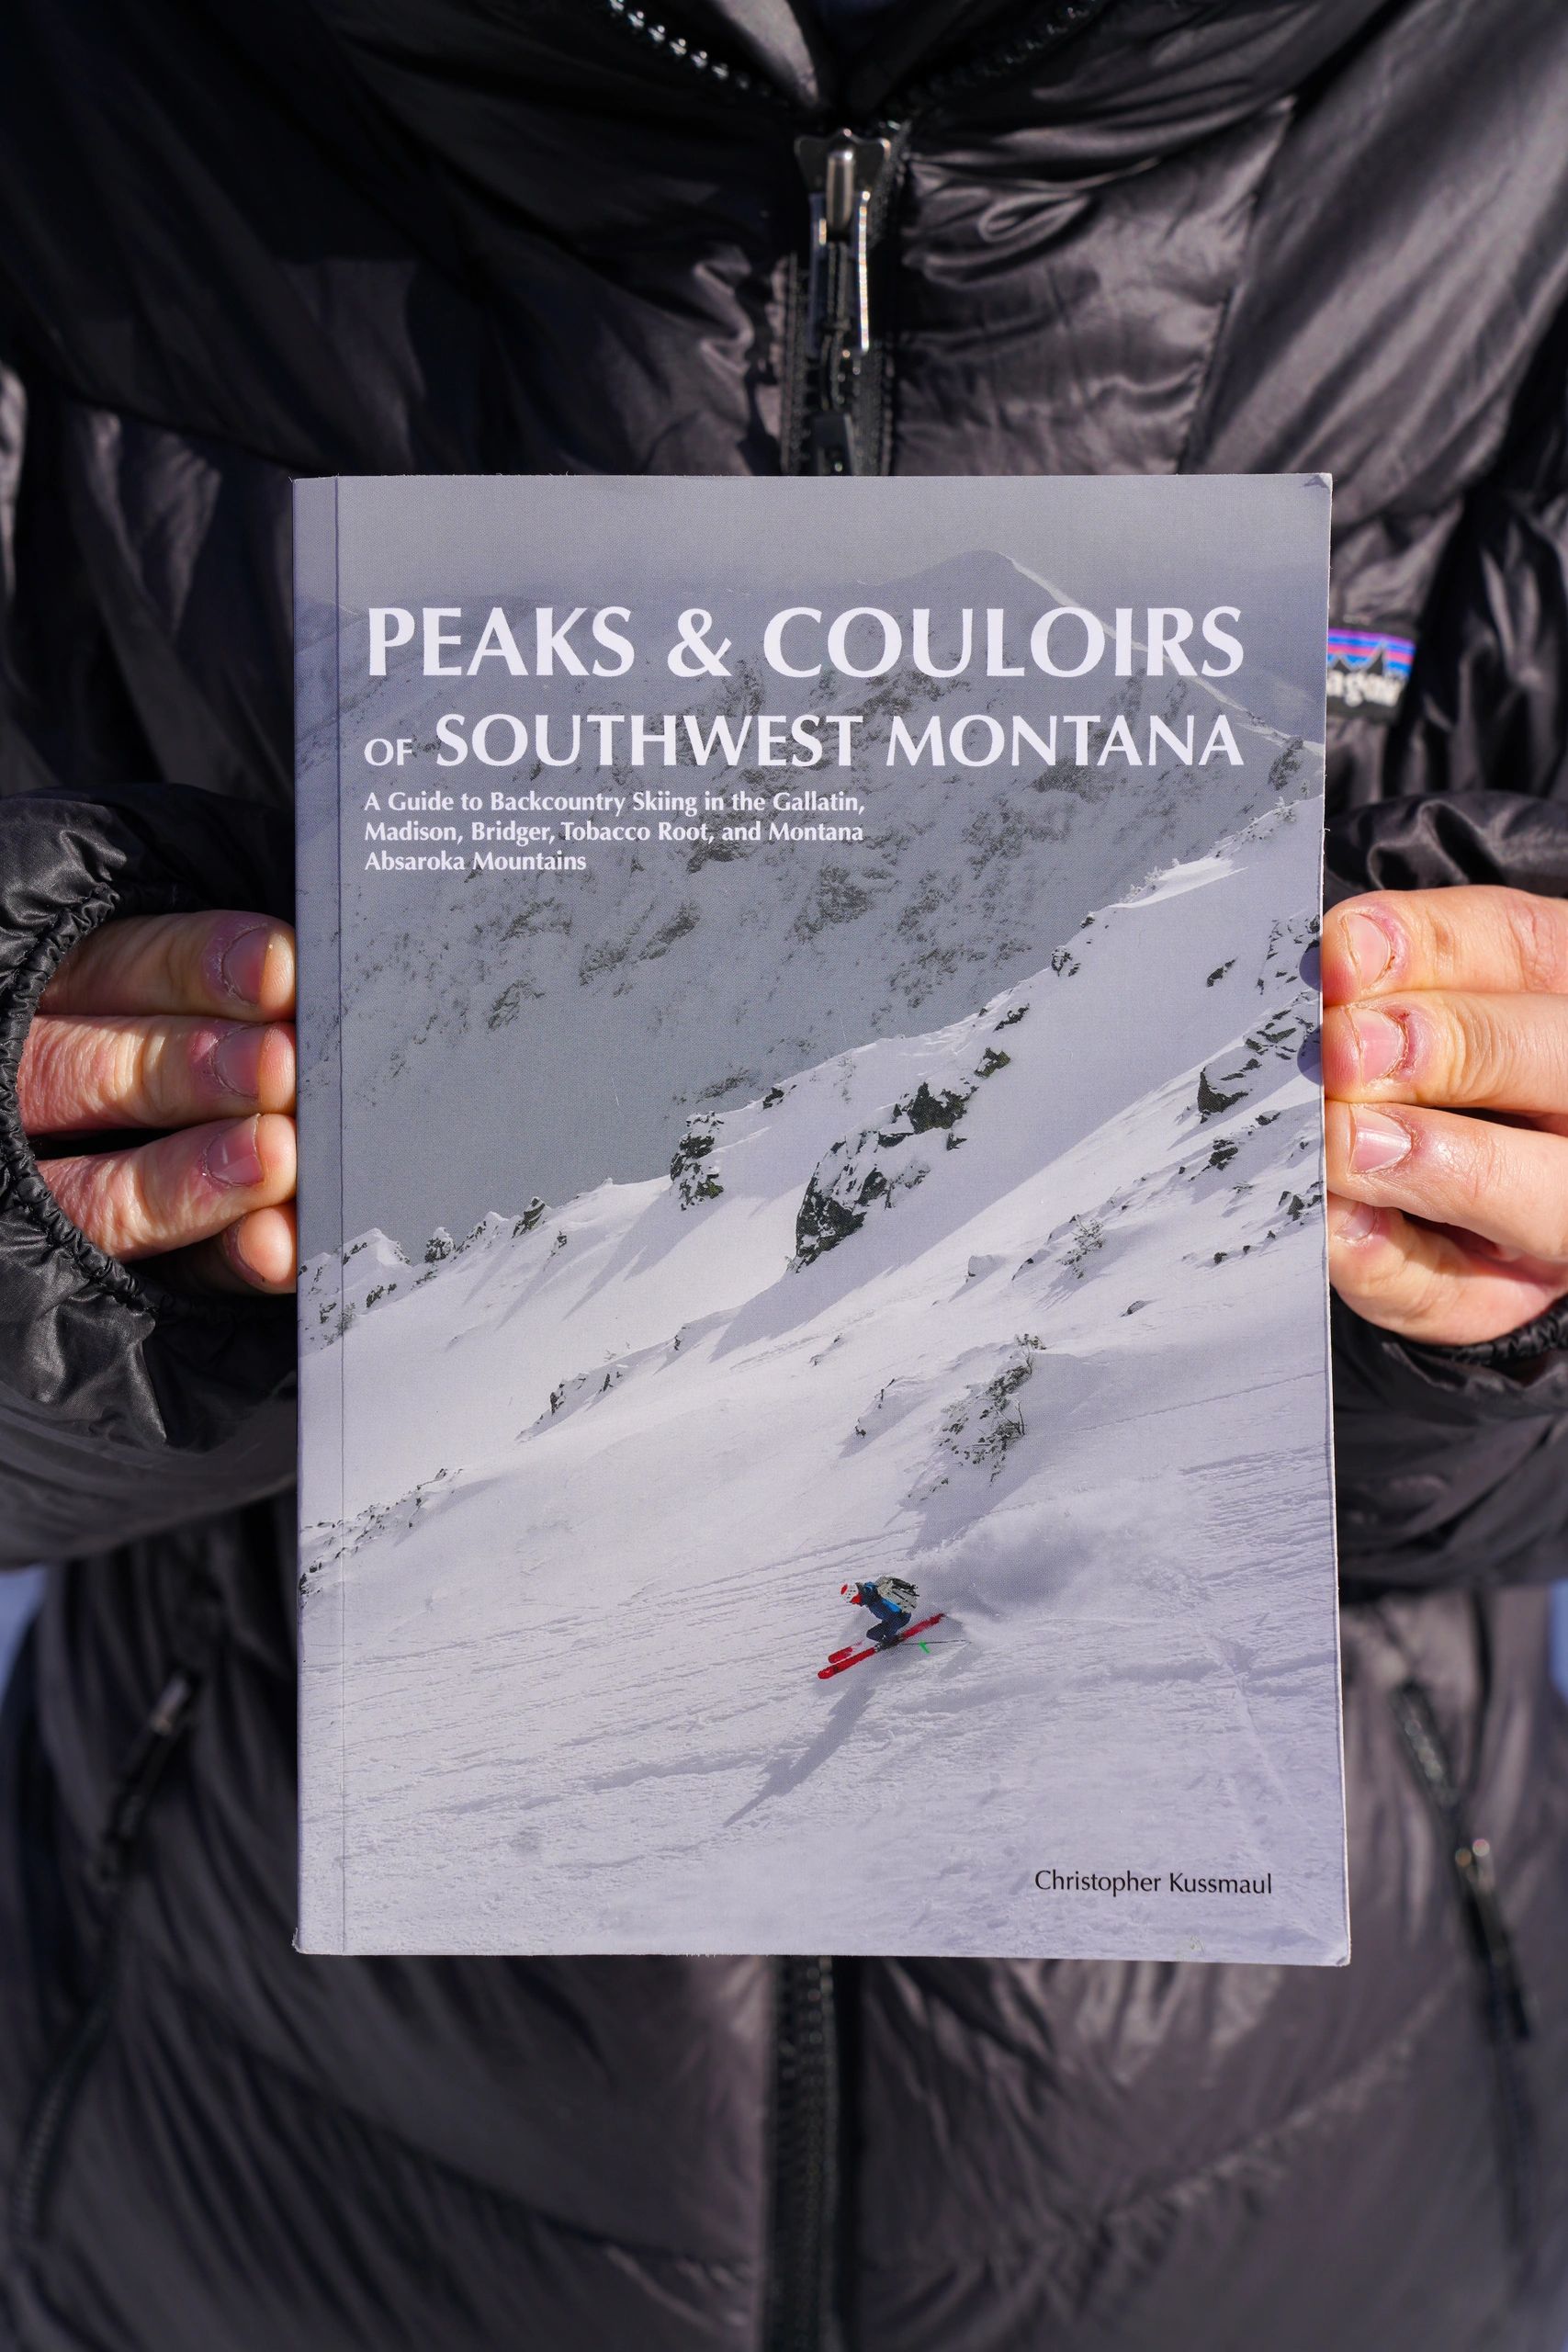 Bozeman and the greater southwest Montana area's only comprehensive backcountry ski guide.  